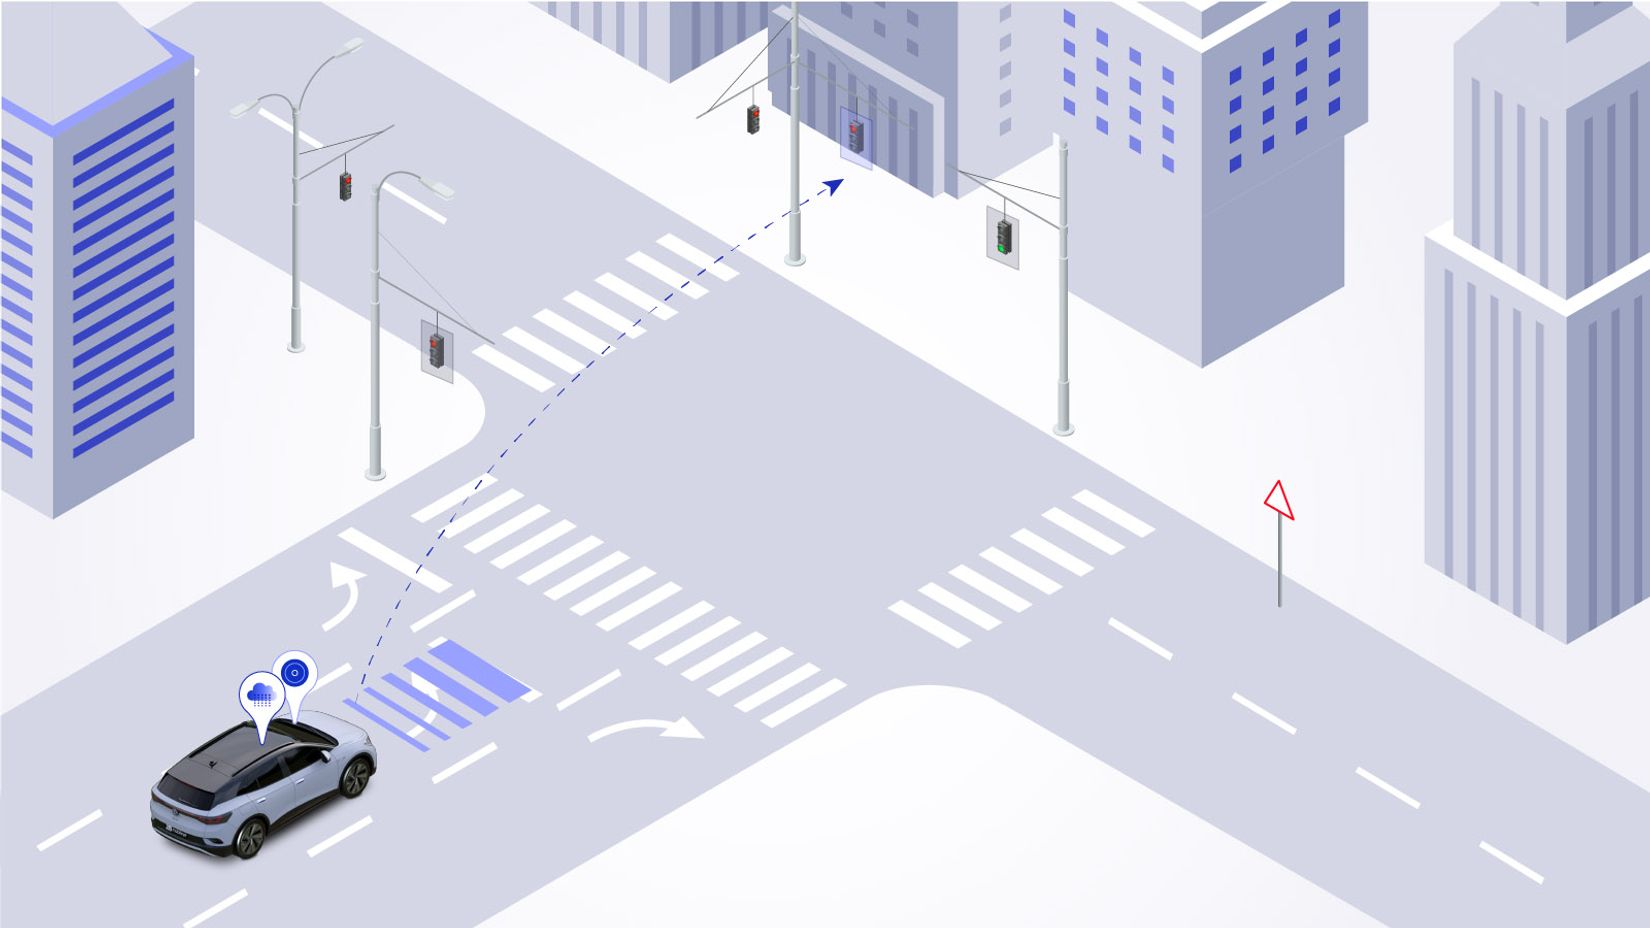 Information like lane-level traffic-light relevancy helps REM enhanced driver-assistance systems with crowdsourced data.